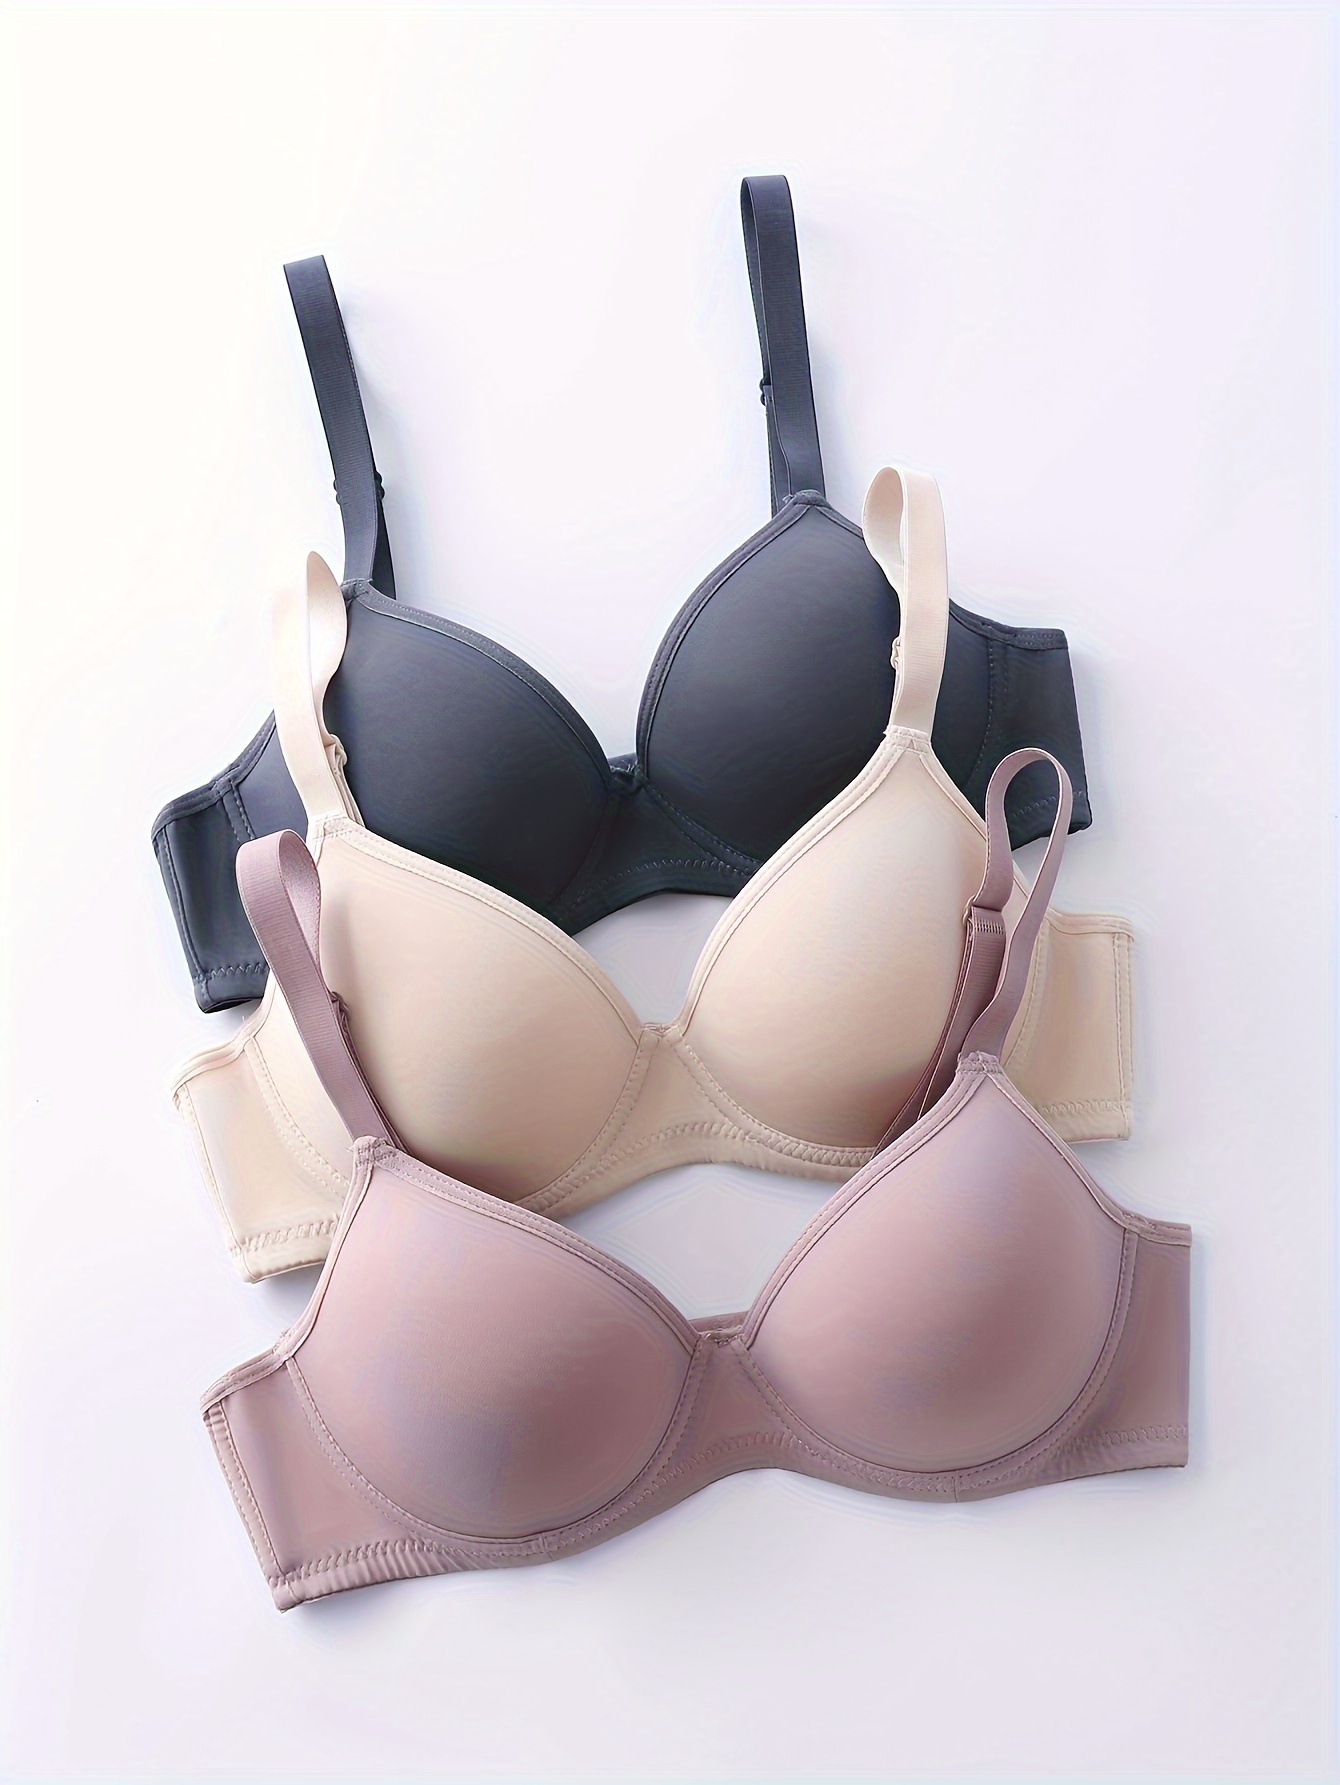 Women's Strapless Push-up Bra With Anti-slip Design And Seamless Cups, For  Enhancing Small Breasts, Prevent Sagging And Prevent Exposure Underwear